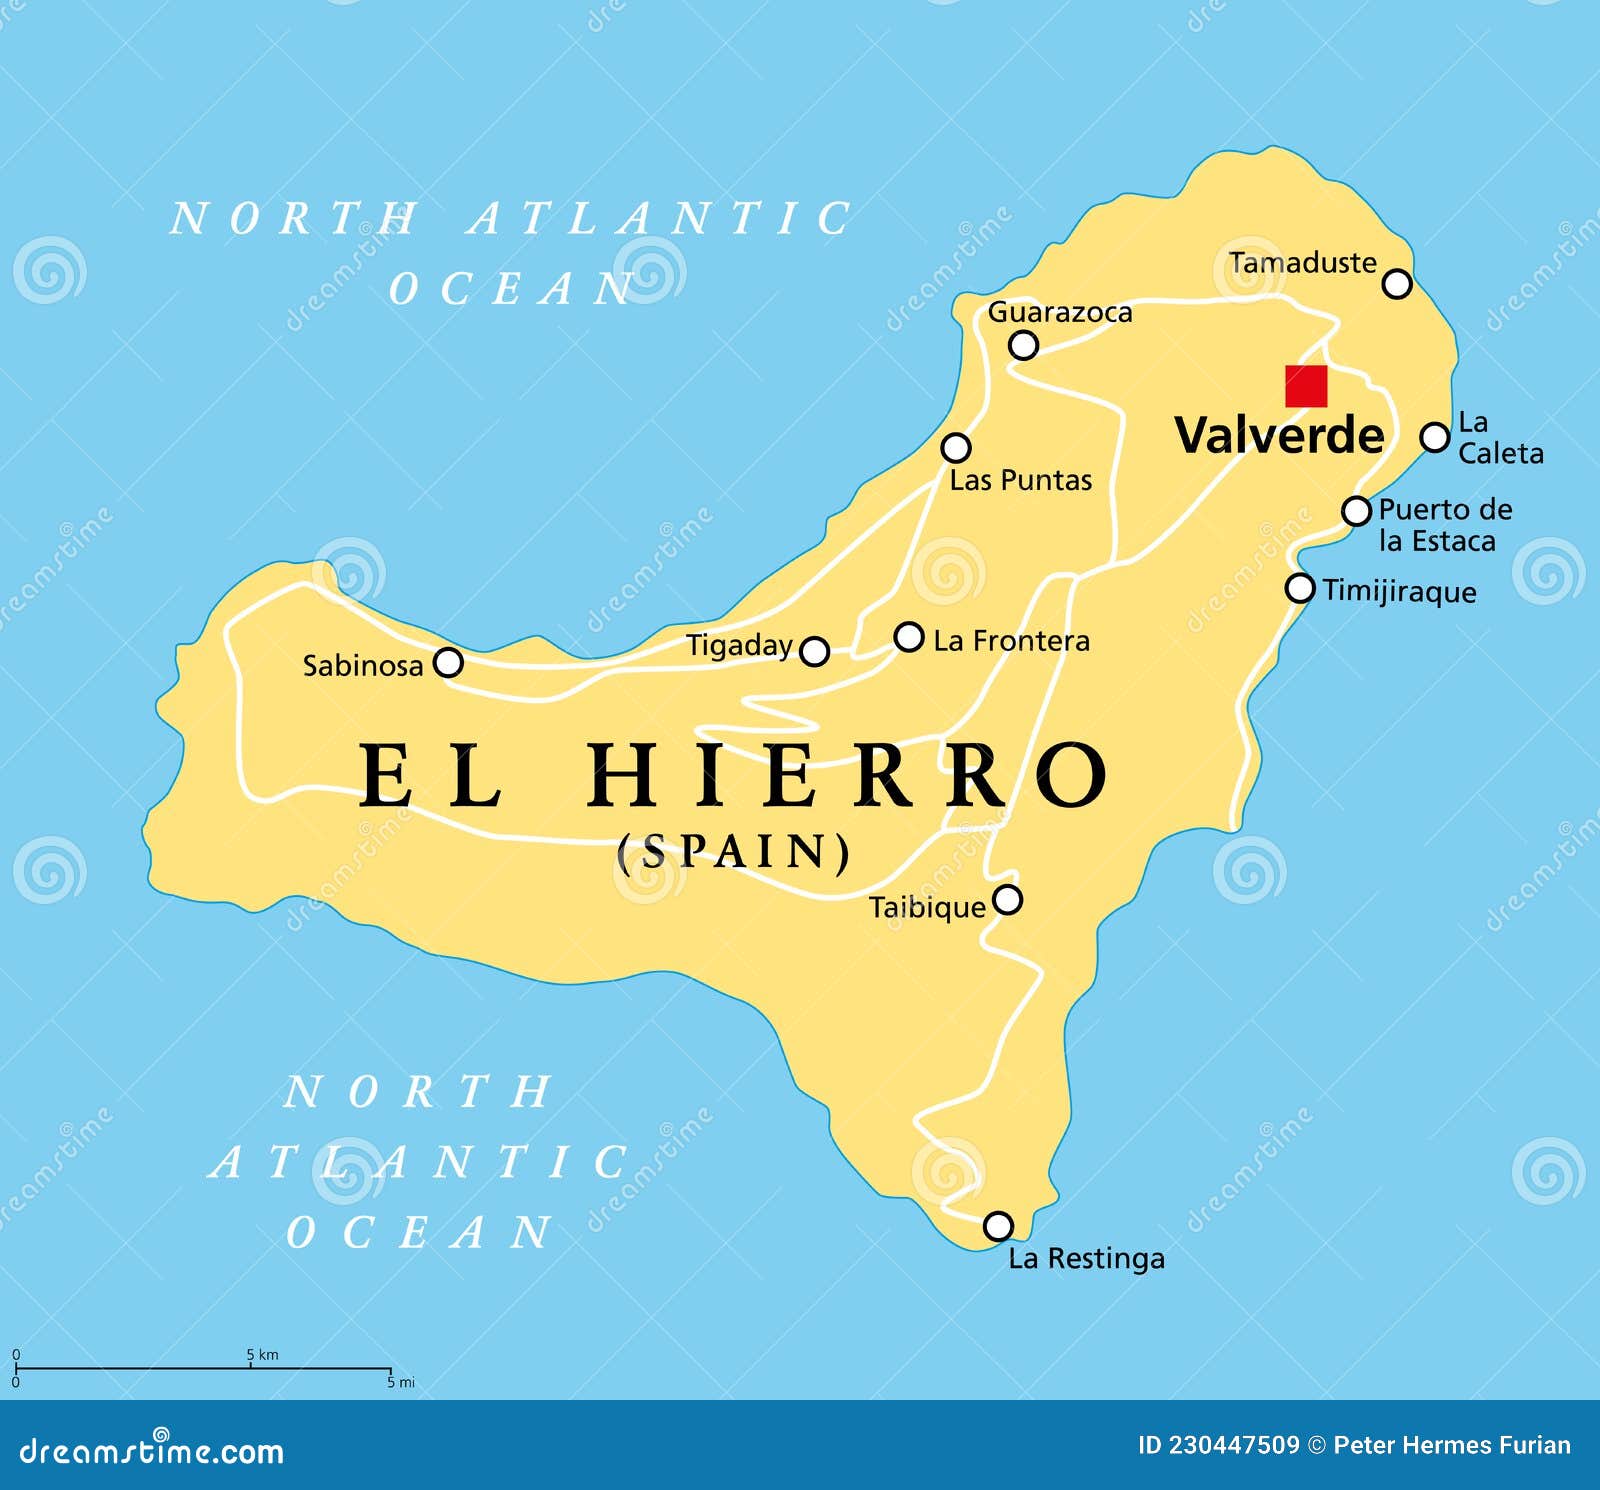 el hierro island, political map, part of the canary islands, spain